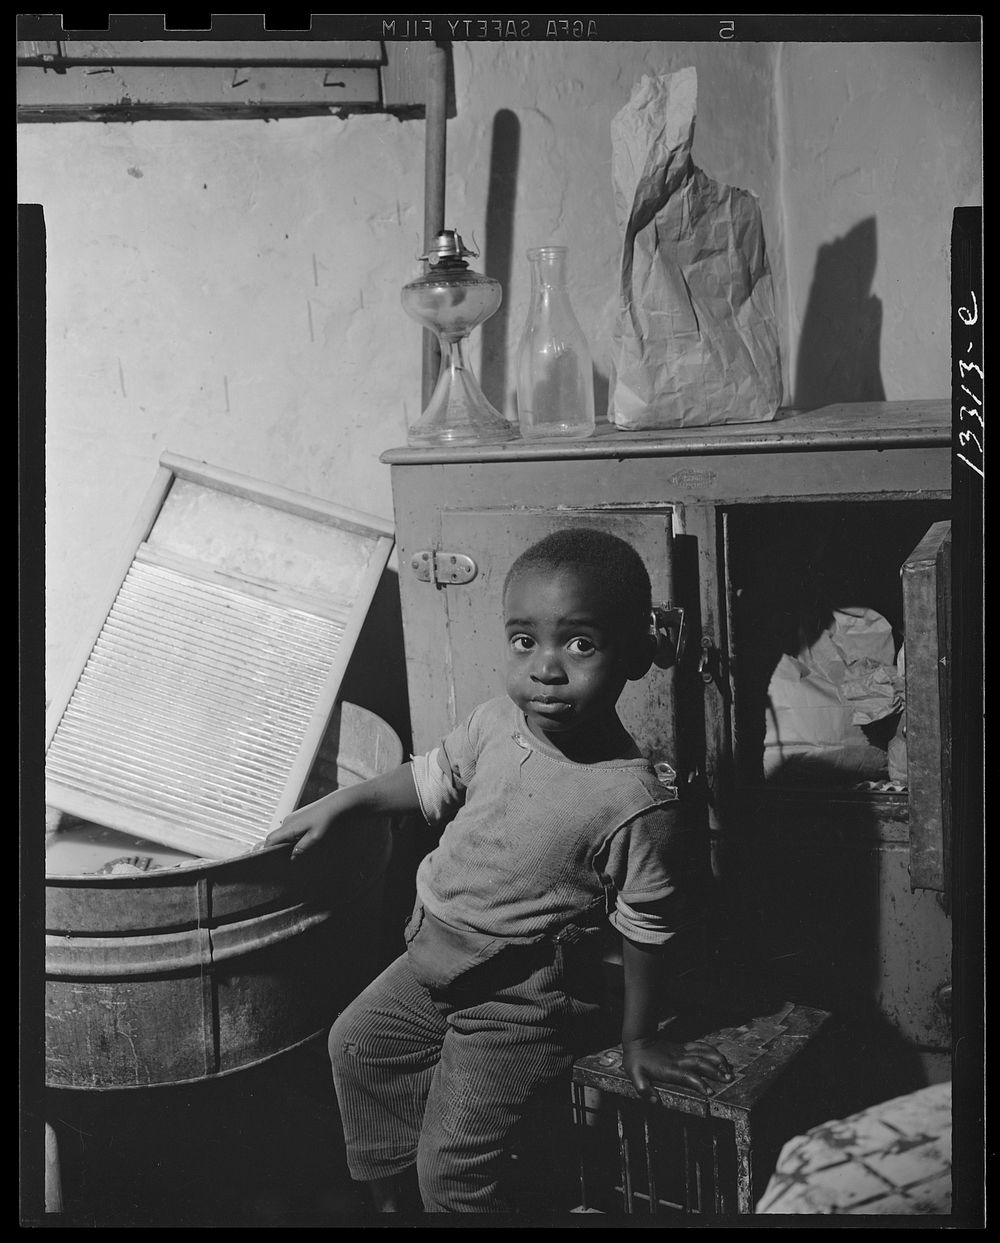 Washington, D.C. A young boy who lives near the nation's capitol. Sourced from the Library of Congress.